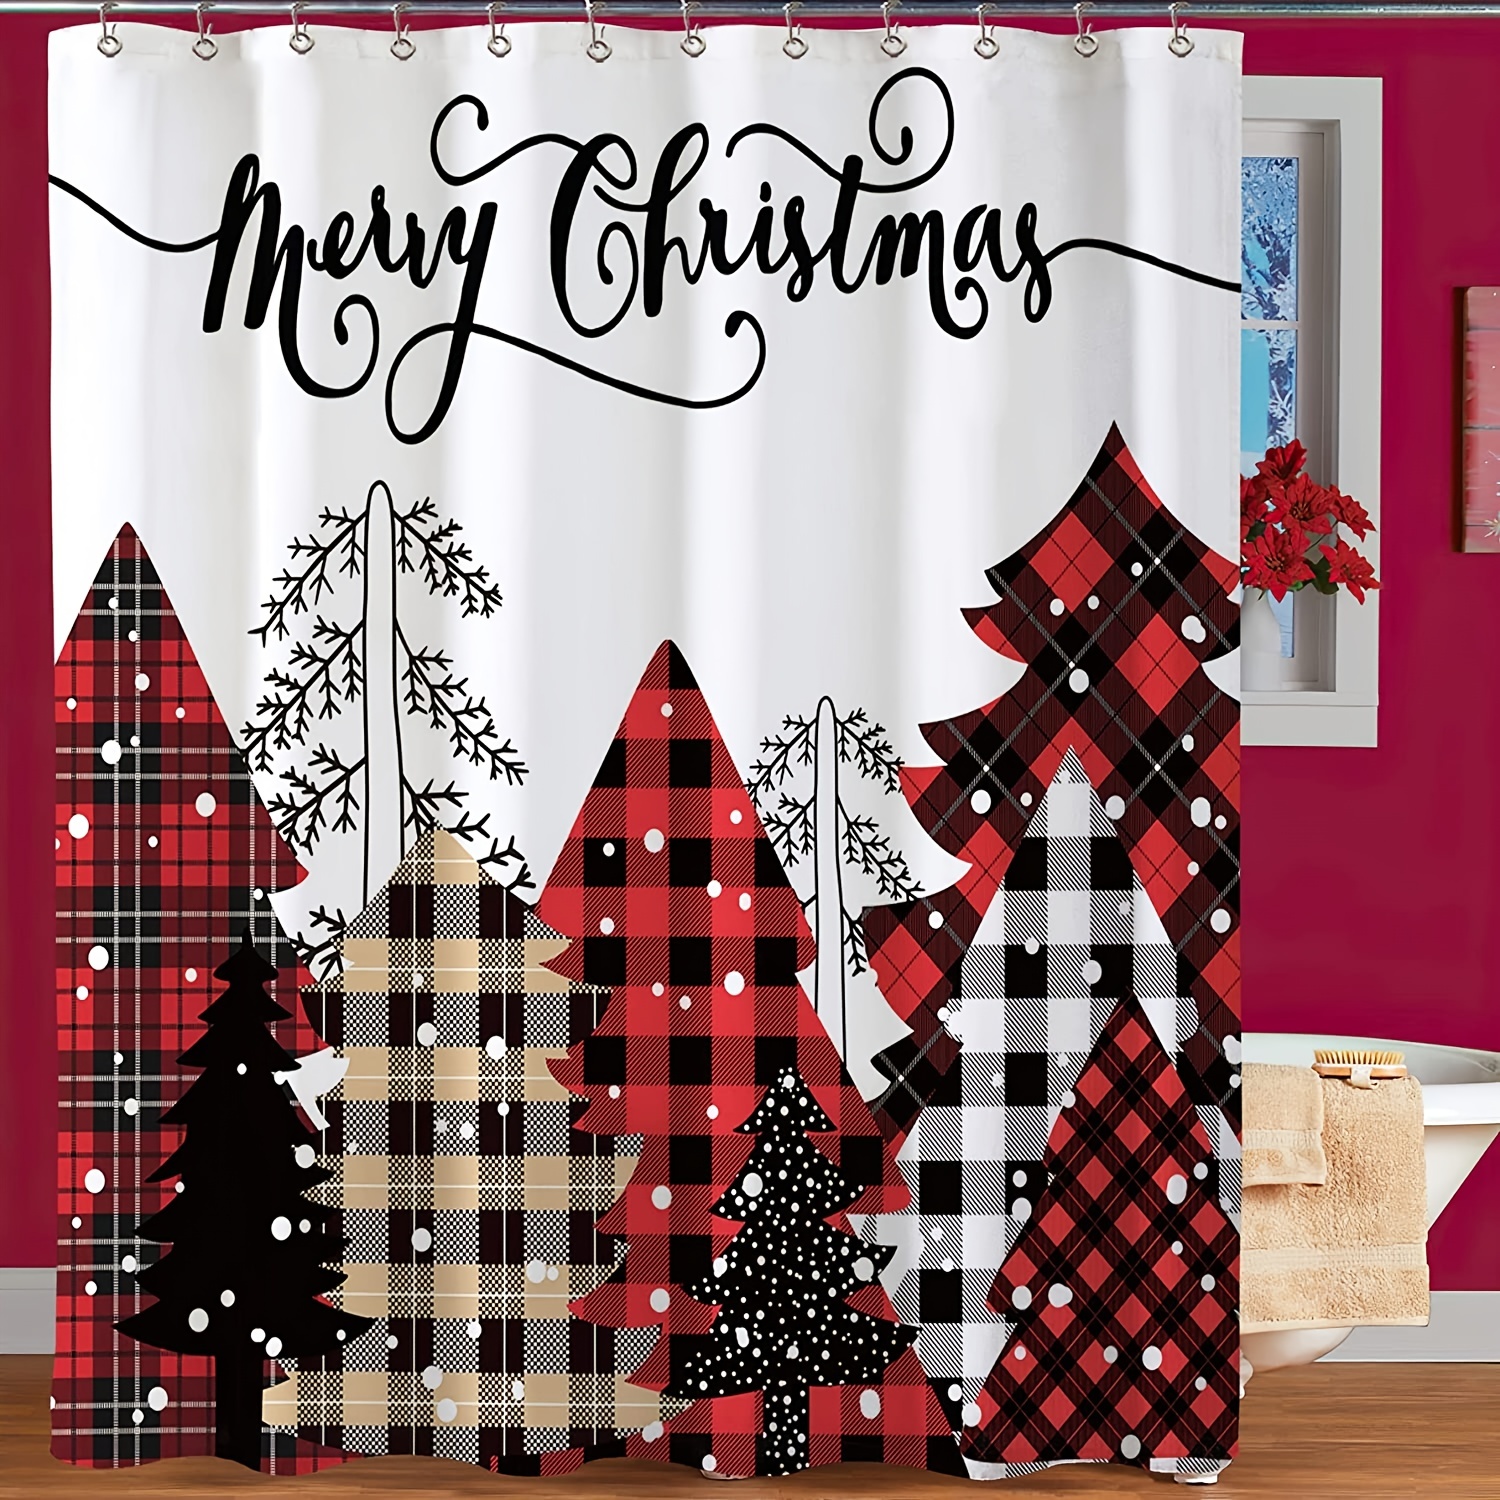 Waterproof Fabric Shower Curtain, Christmas Tree Shower Curtain for  Bathroom Curtains Bathtubs Hotel Washable Shower Curtains with 12 Hooks  Stall